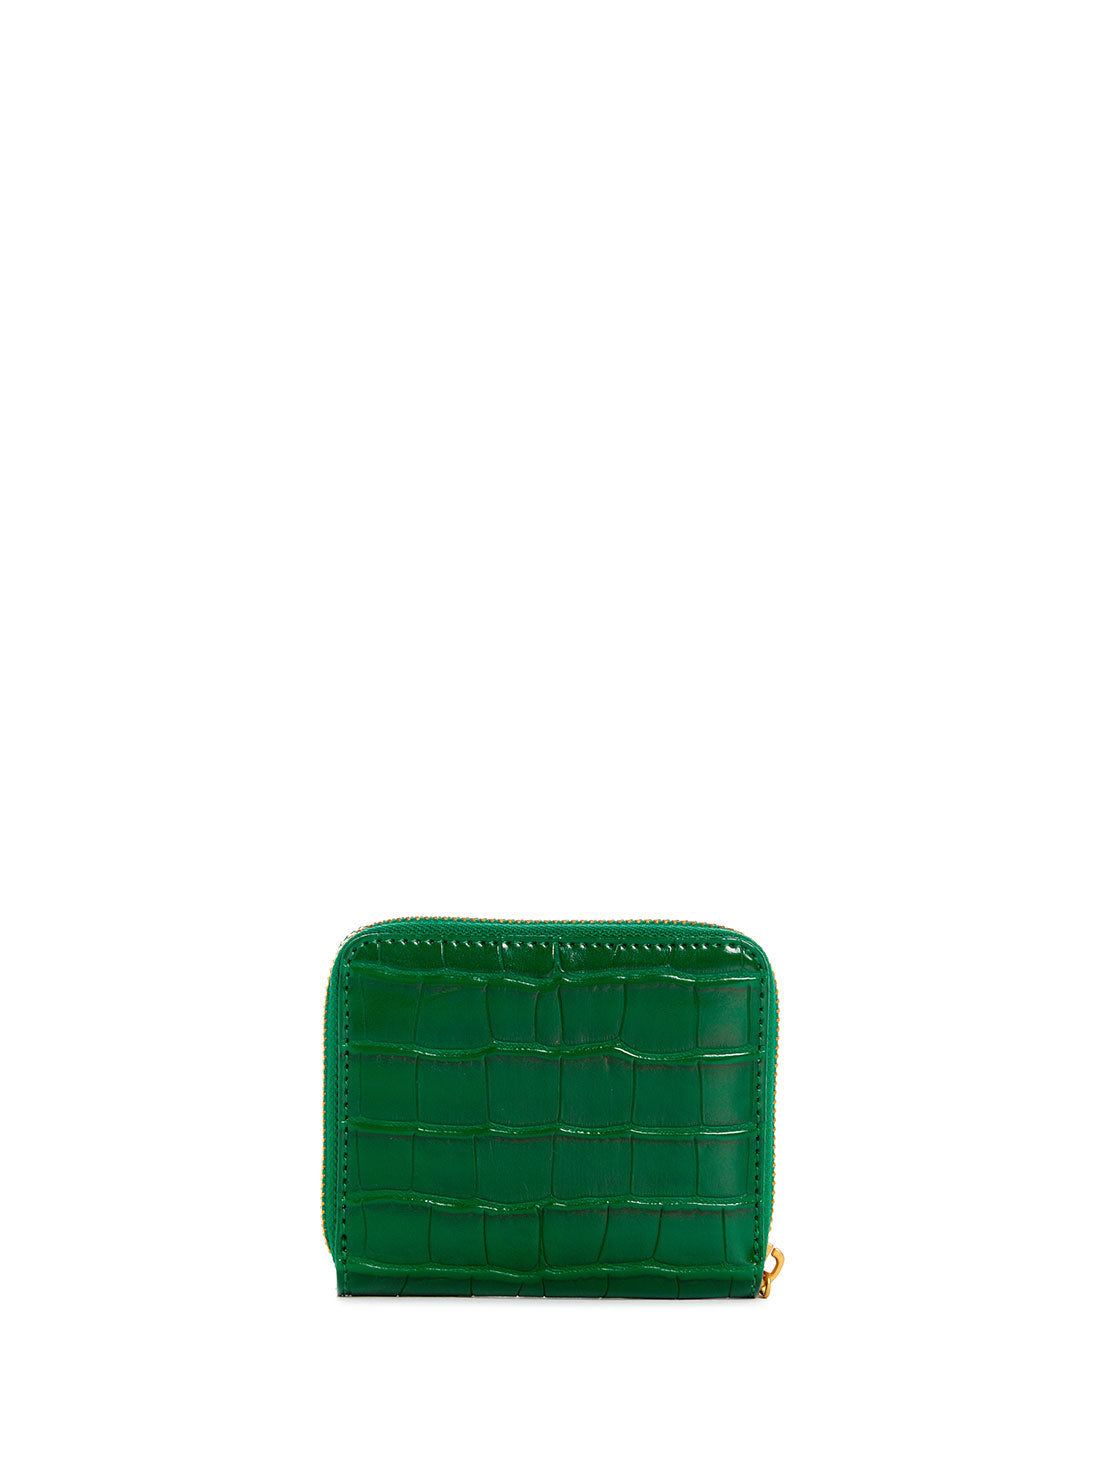 GUESS Women's Green James Croco Small Wallet CA877337 Back View